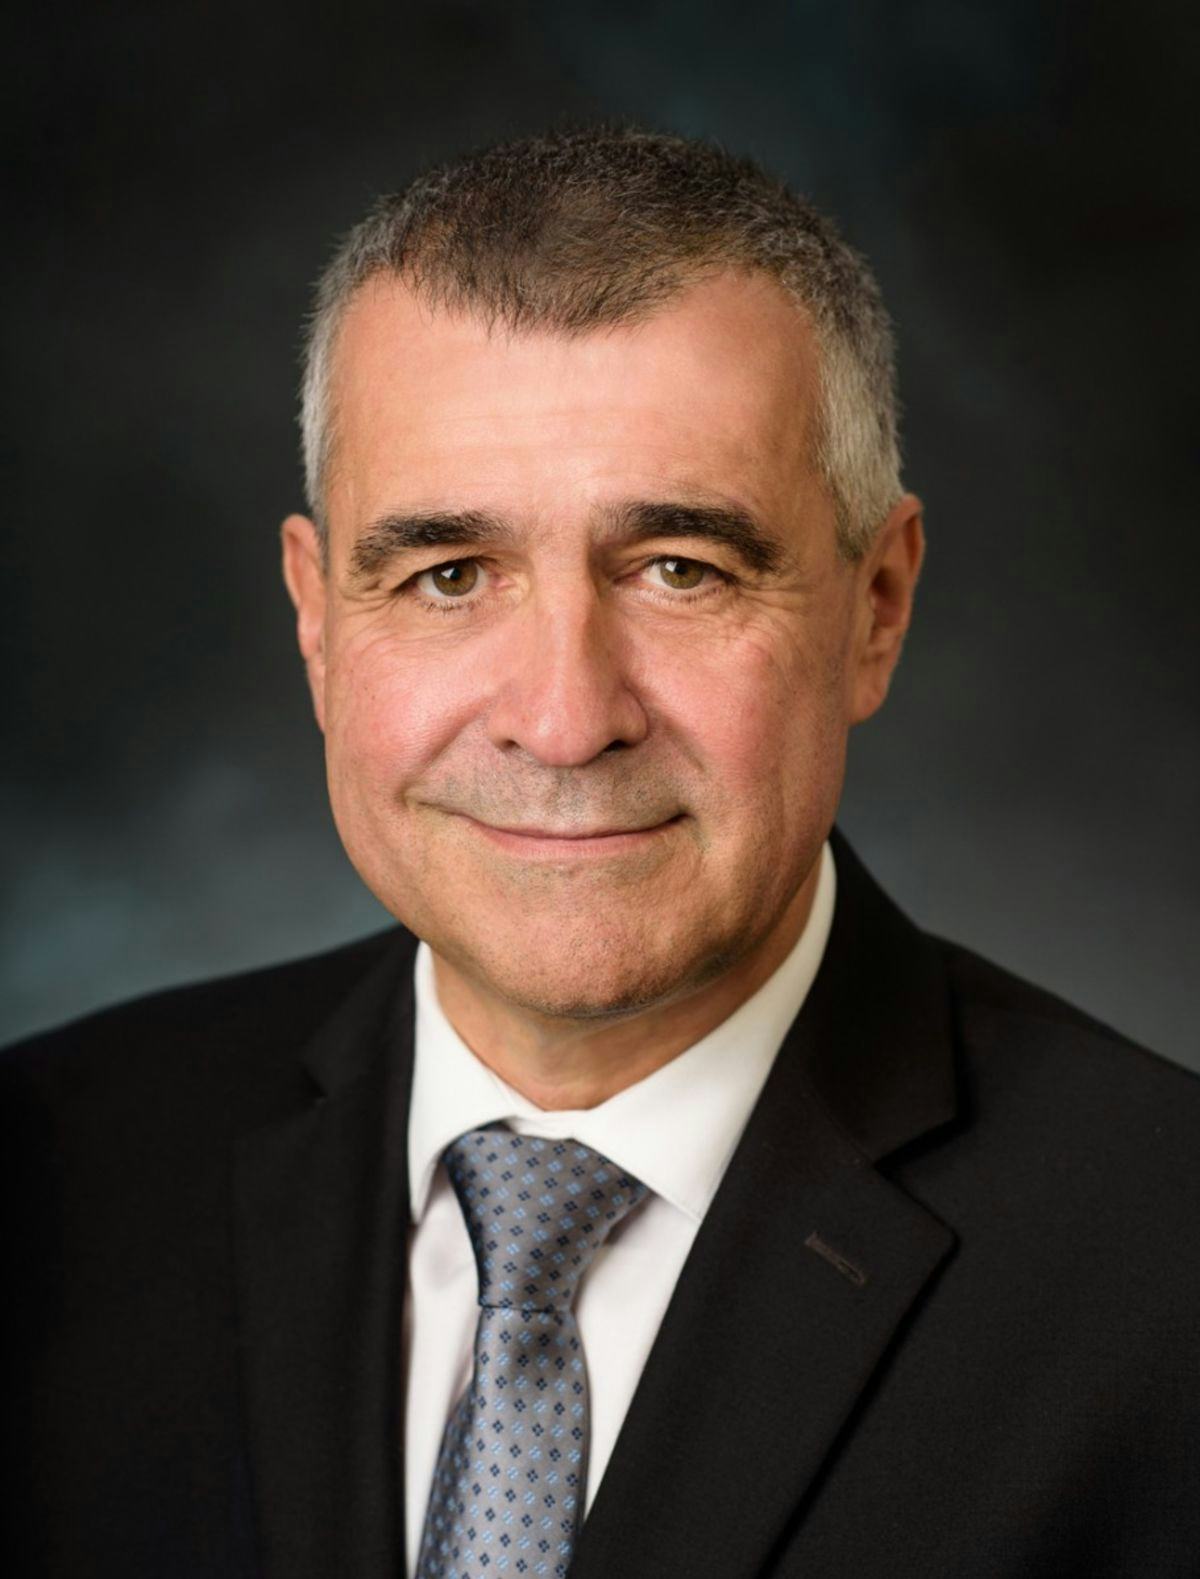 Dr. Christophe Pierre, Provost and Vice President for Academic Affairs